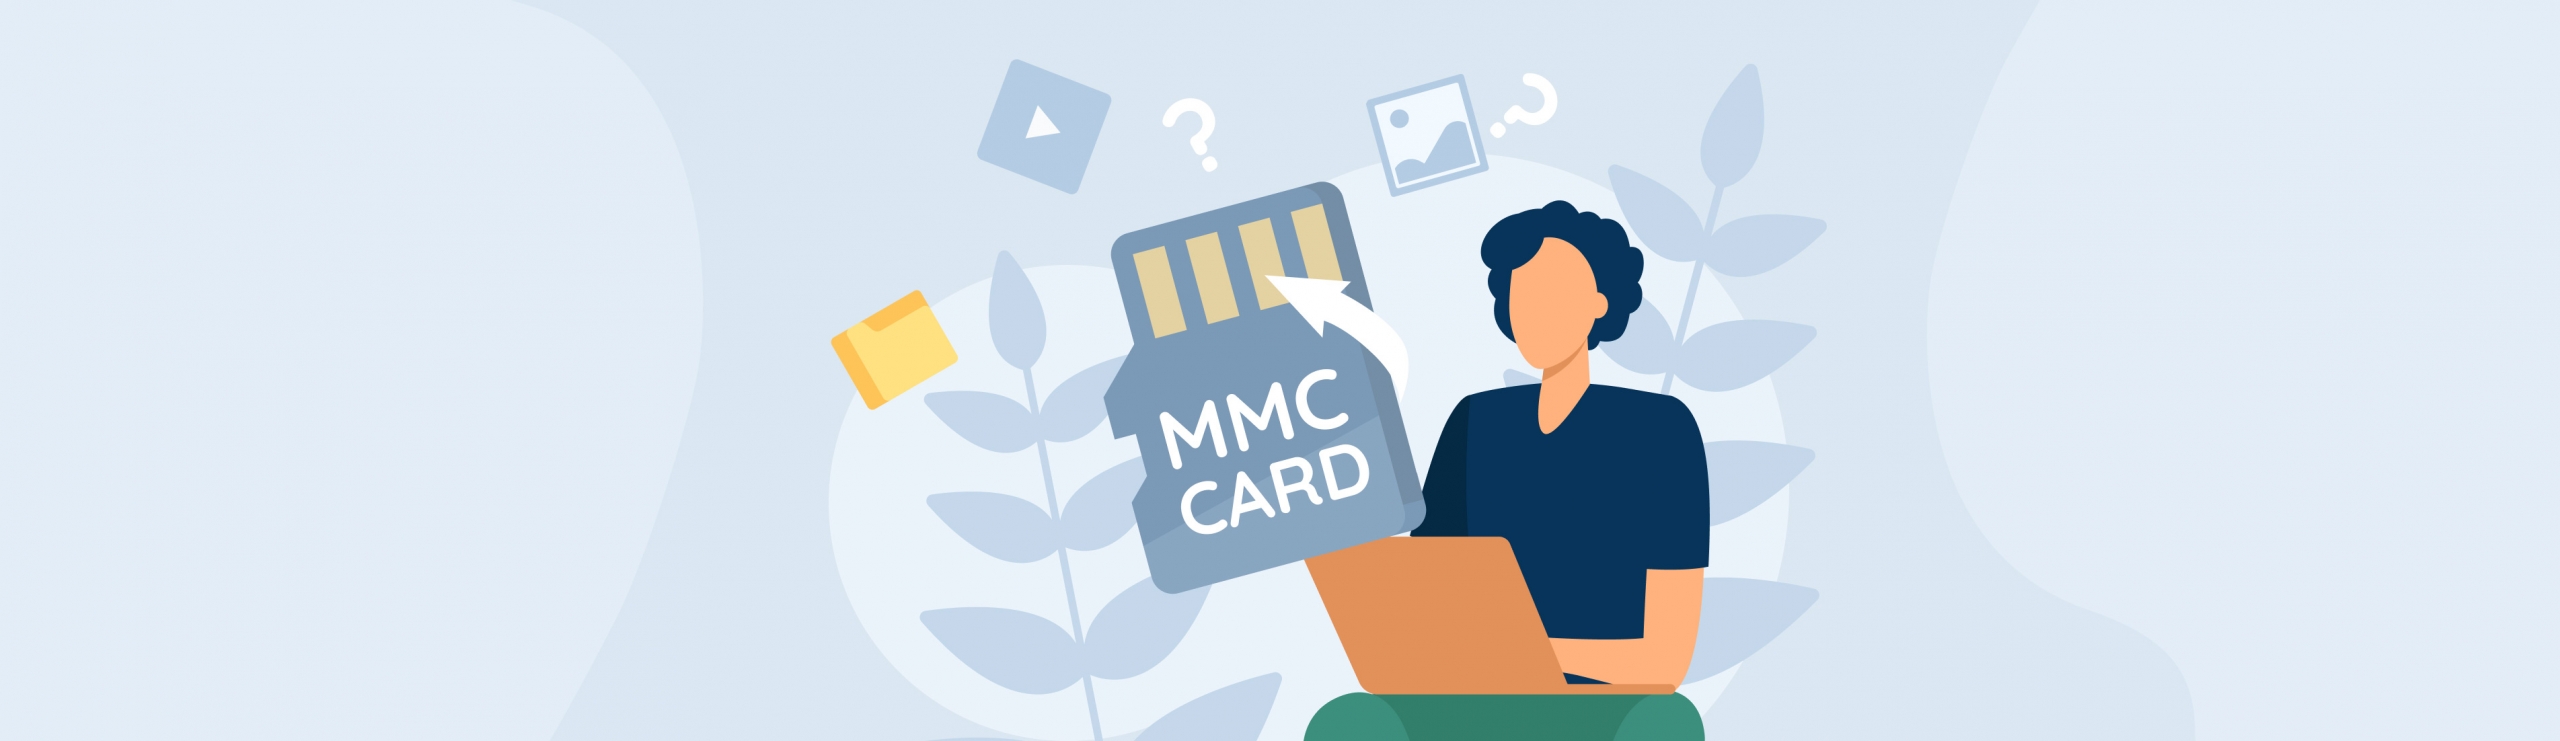 recover files from mmc card